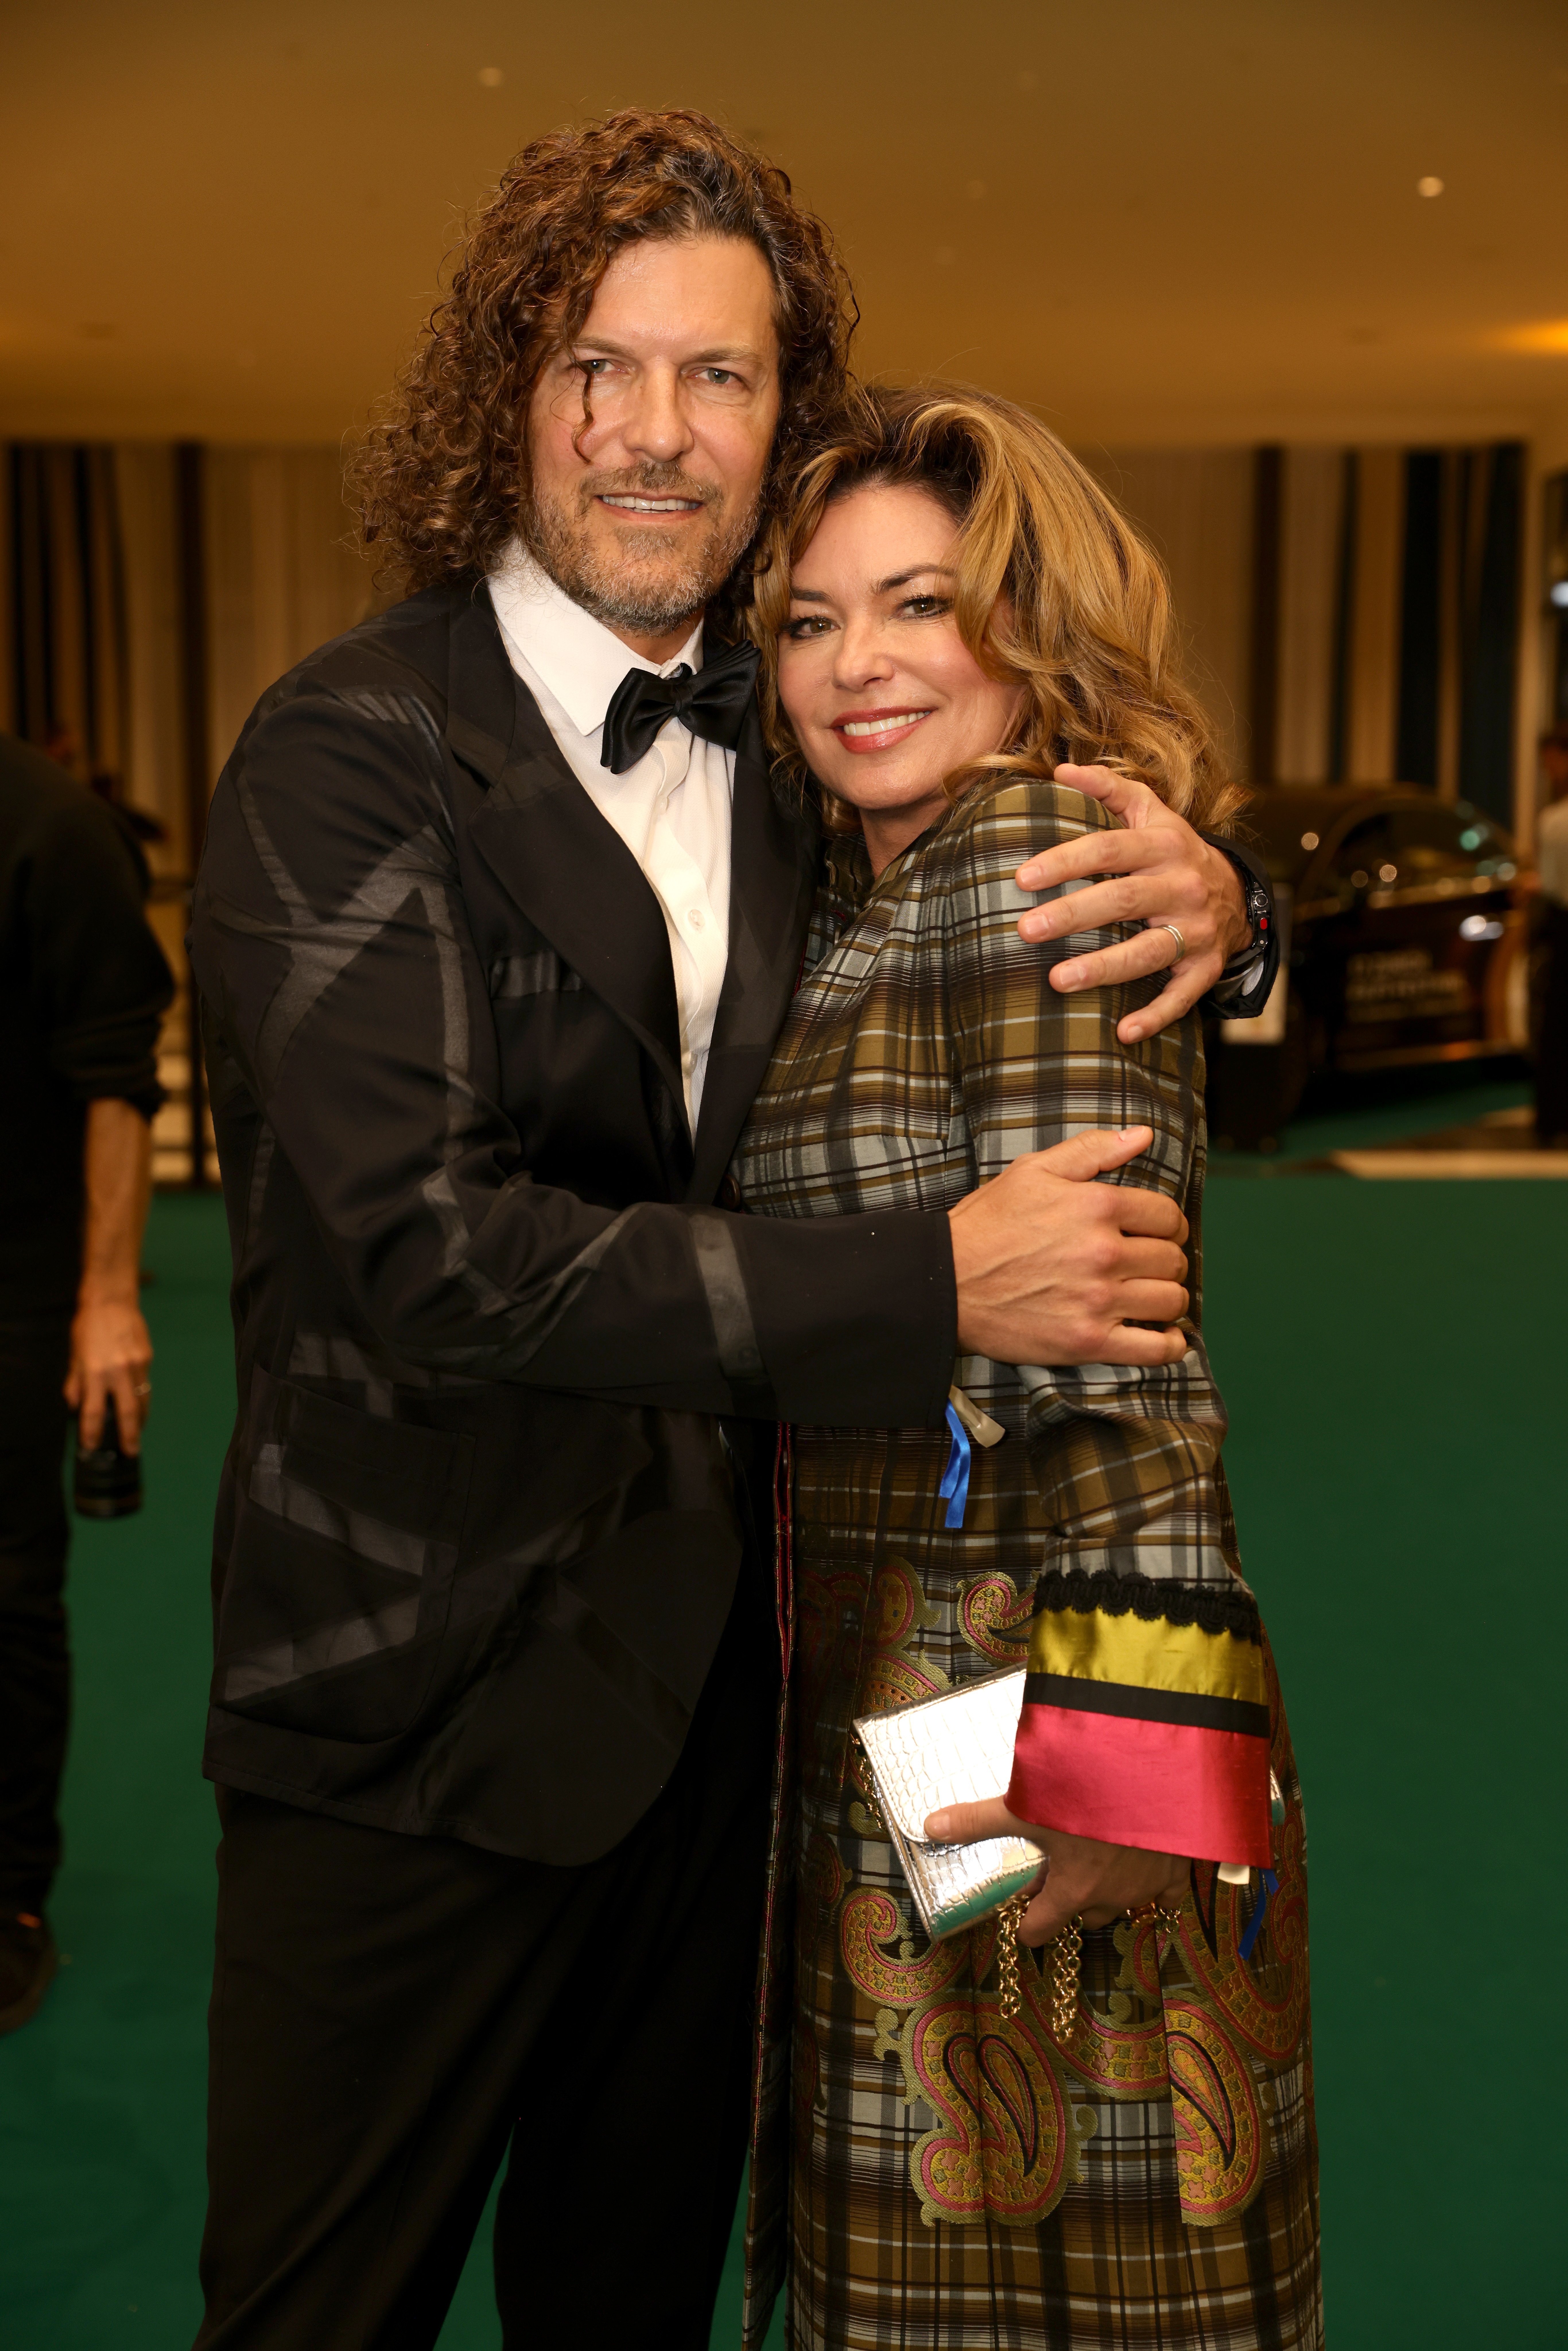 Frédéric Thiébaud and his wife Shania Twain attend the opening night and premiere of "Und morgen seid ihr tot" during the 17th Zurich Film Festival at Kongresshaus on September 23, 2021, in Zurich, Switzerland. | Source: Getty Images